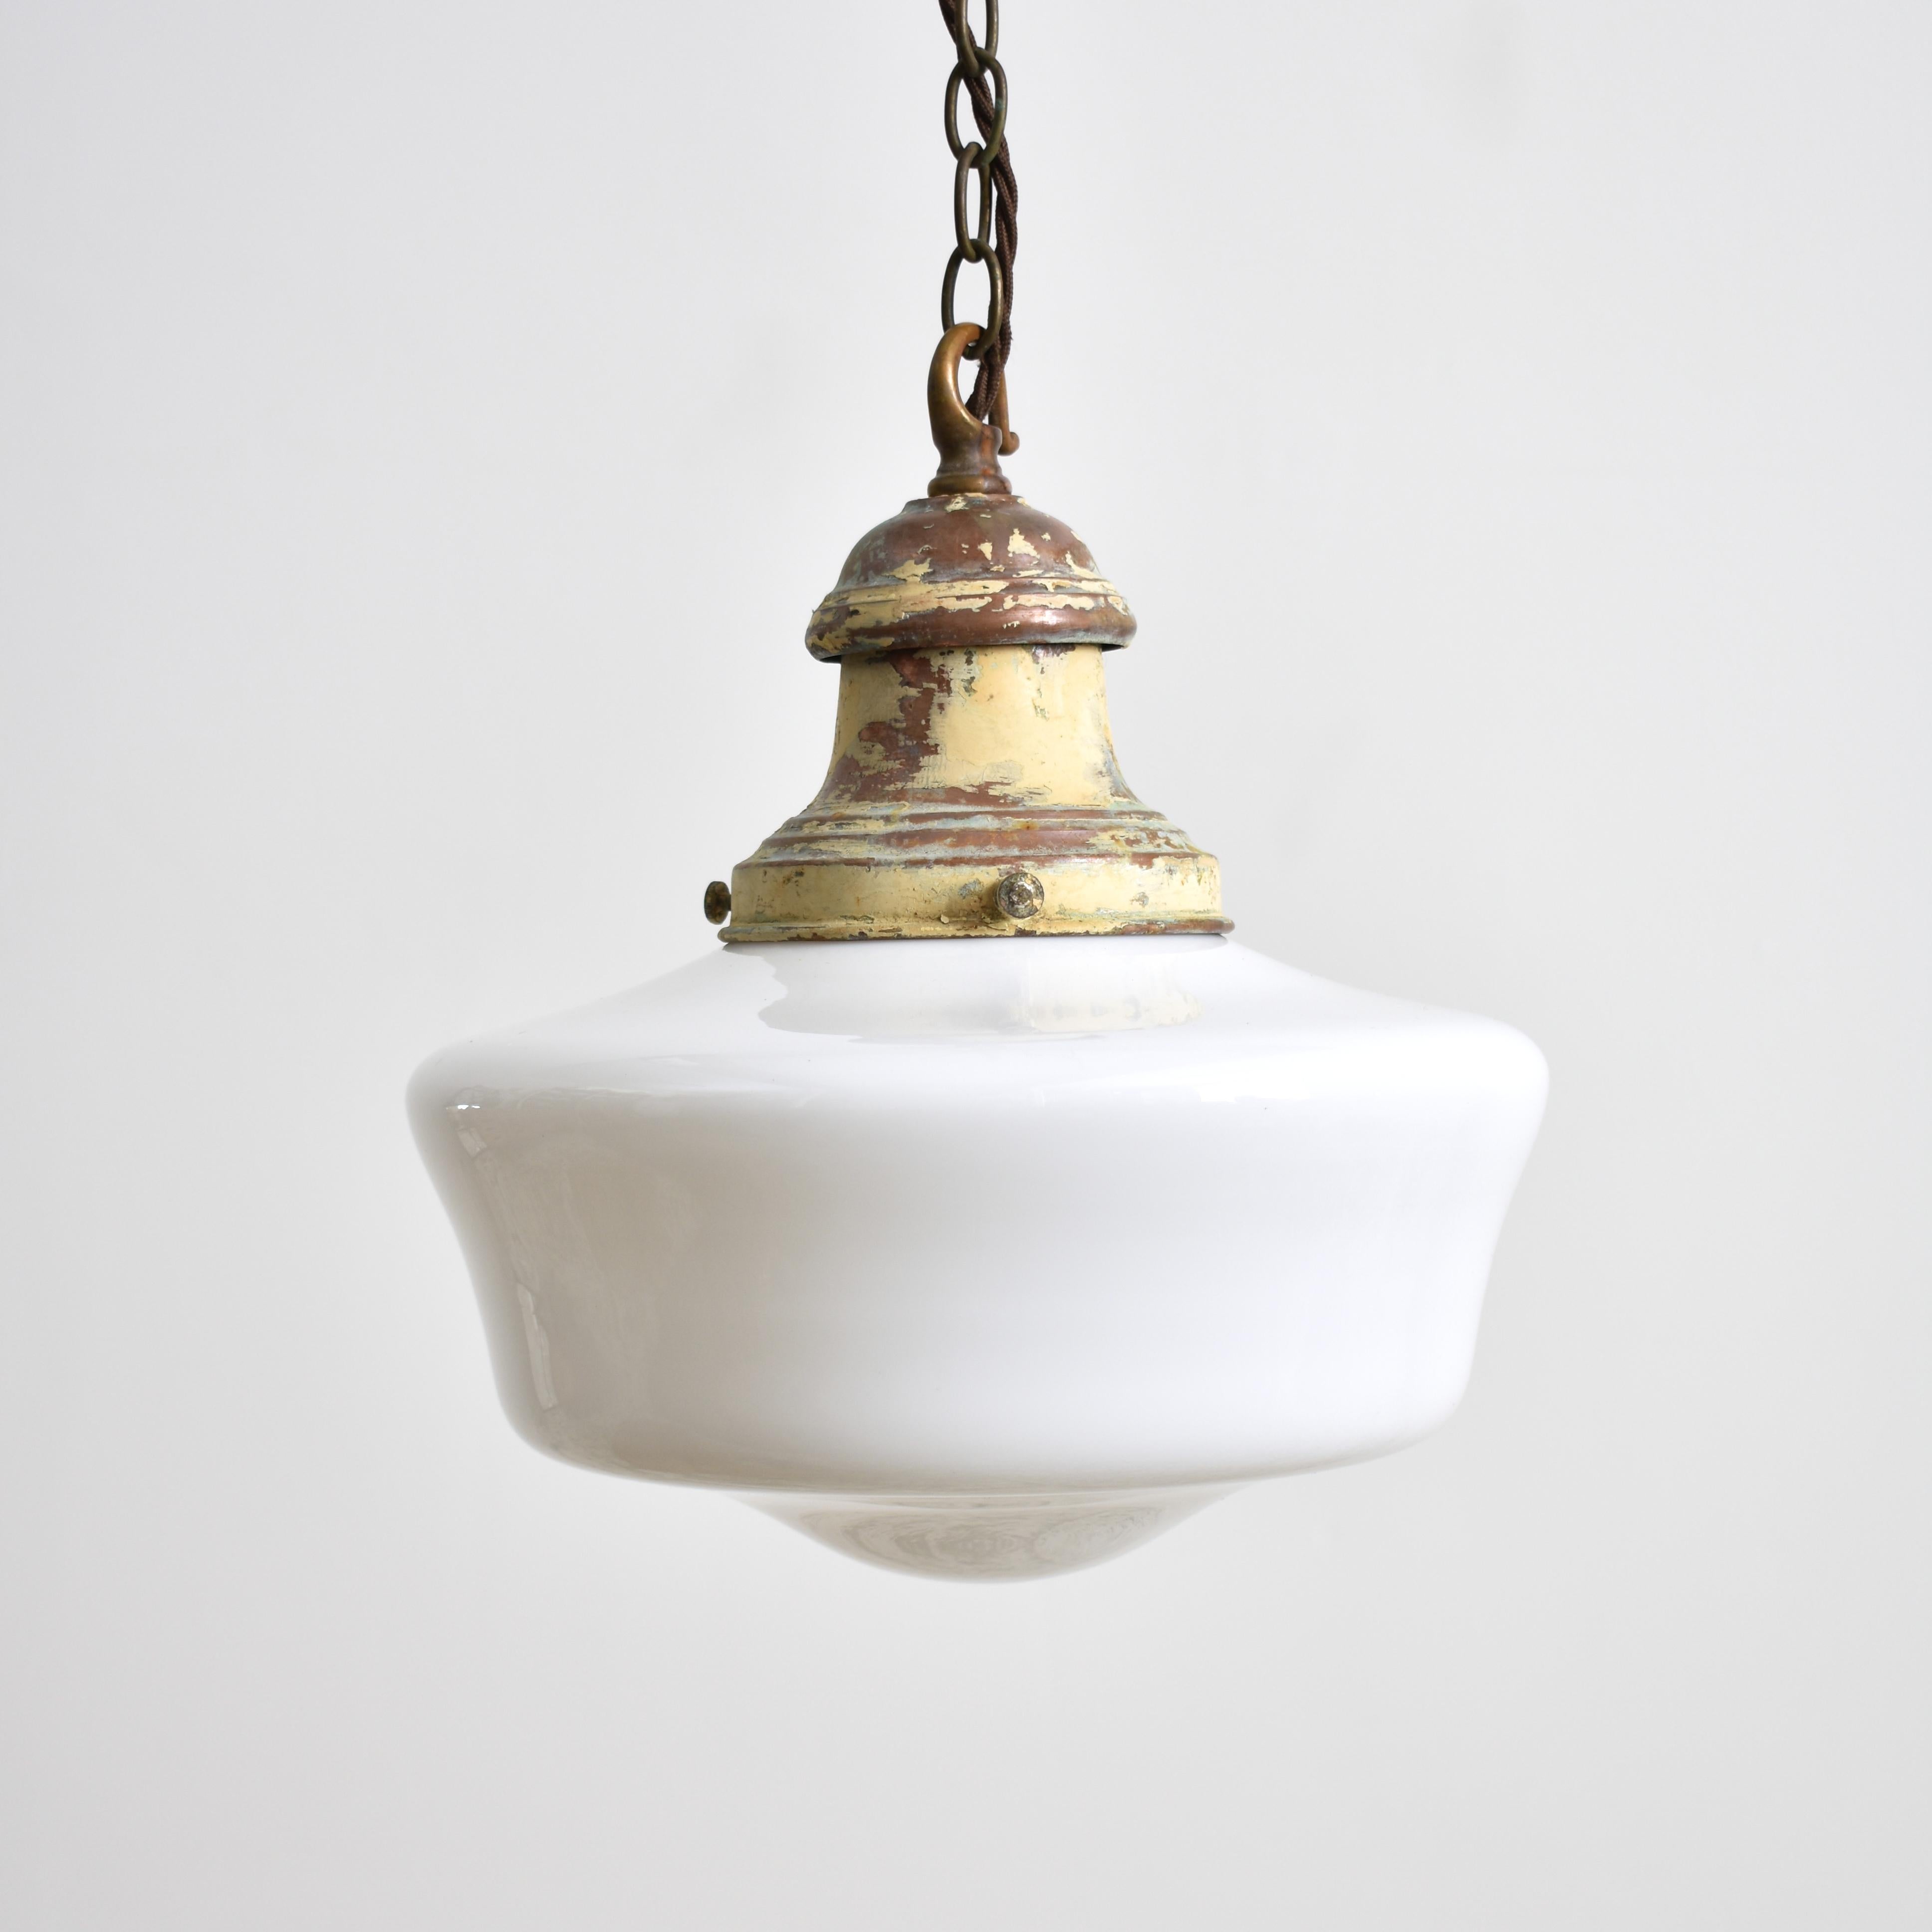 Pair of Antique Opaline Pendant Lights

A pair of original opaline glass pendant lights. The lights have milk glass opaline shades and original aged copper hanging galleries. The gallery finish has been left untouched in it original